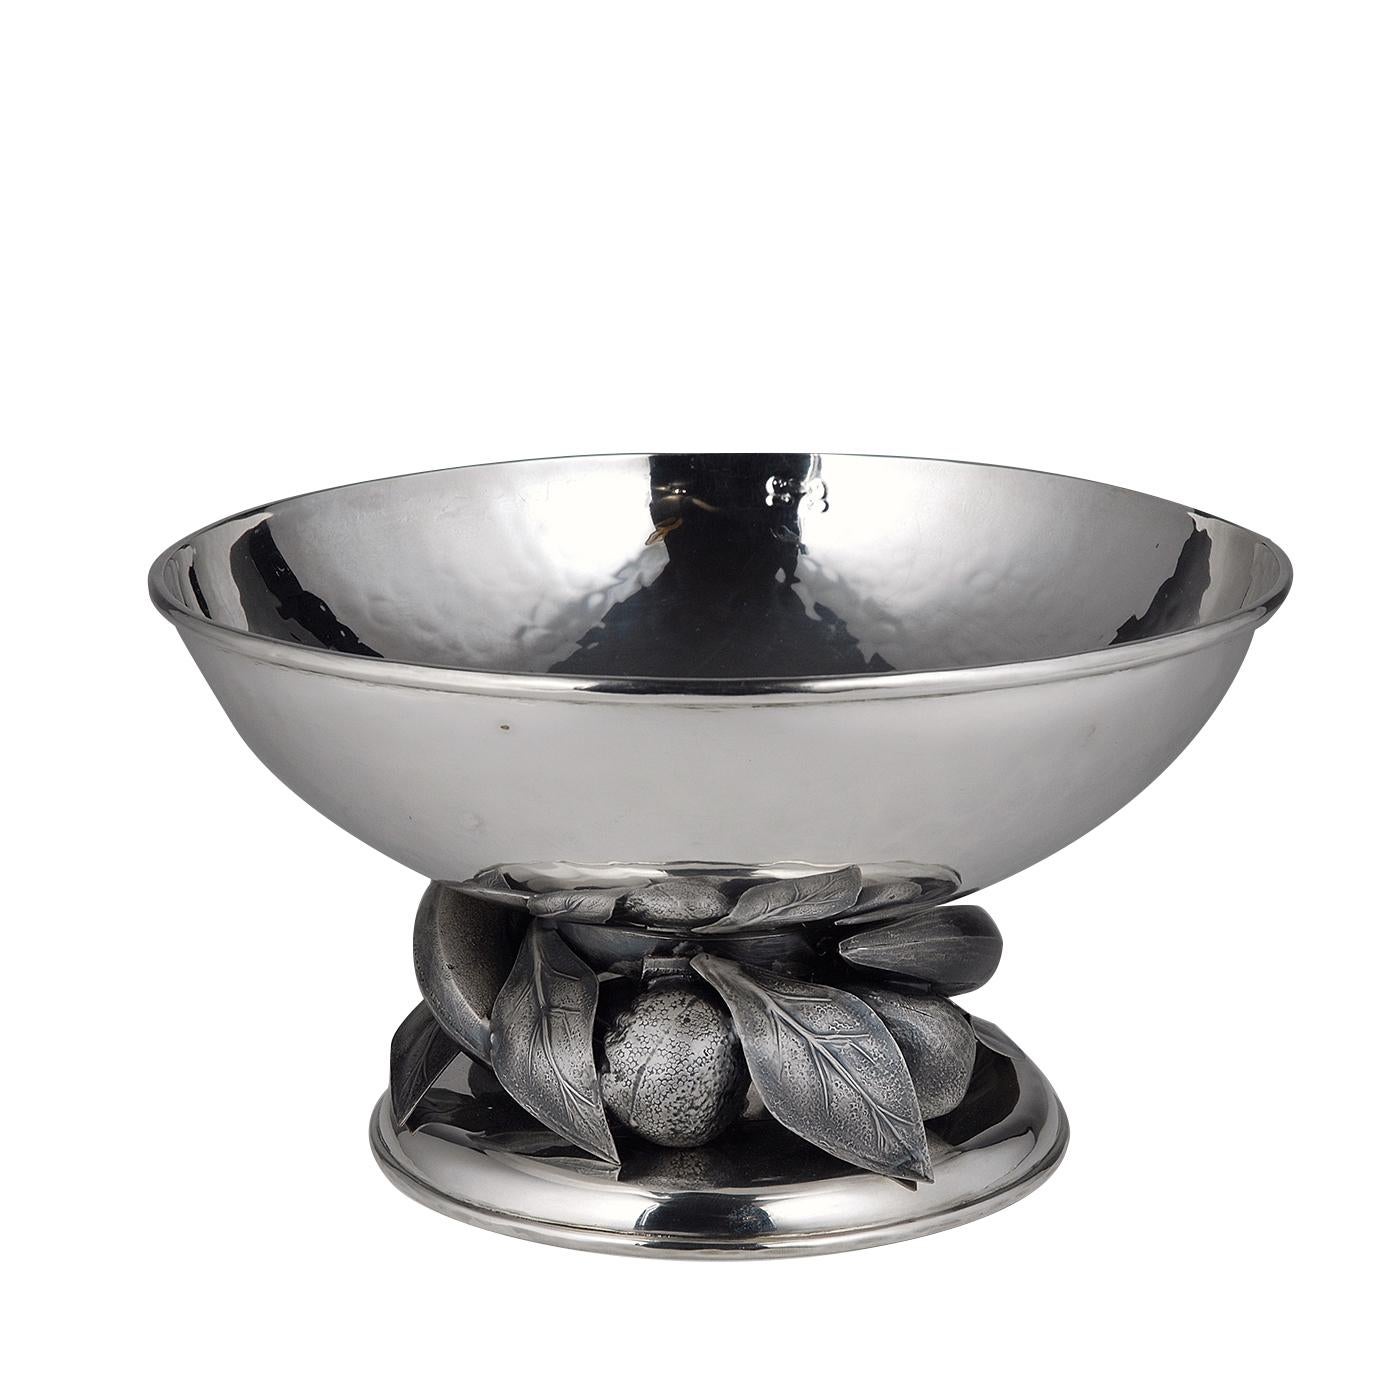 This exquisite fruit bowl is a magnificent example of expert artisanal craftsmanship and elegant design. The round shape of the piece rests on a round base adorned with a series of fruits and leaves that support the body with its lightly-textured